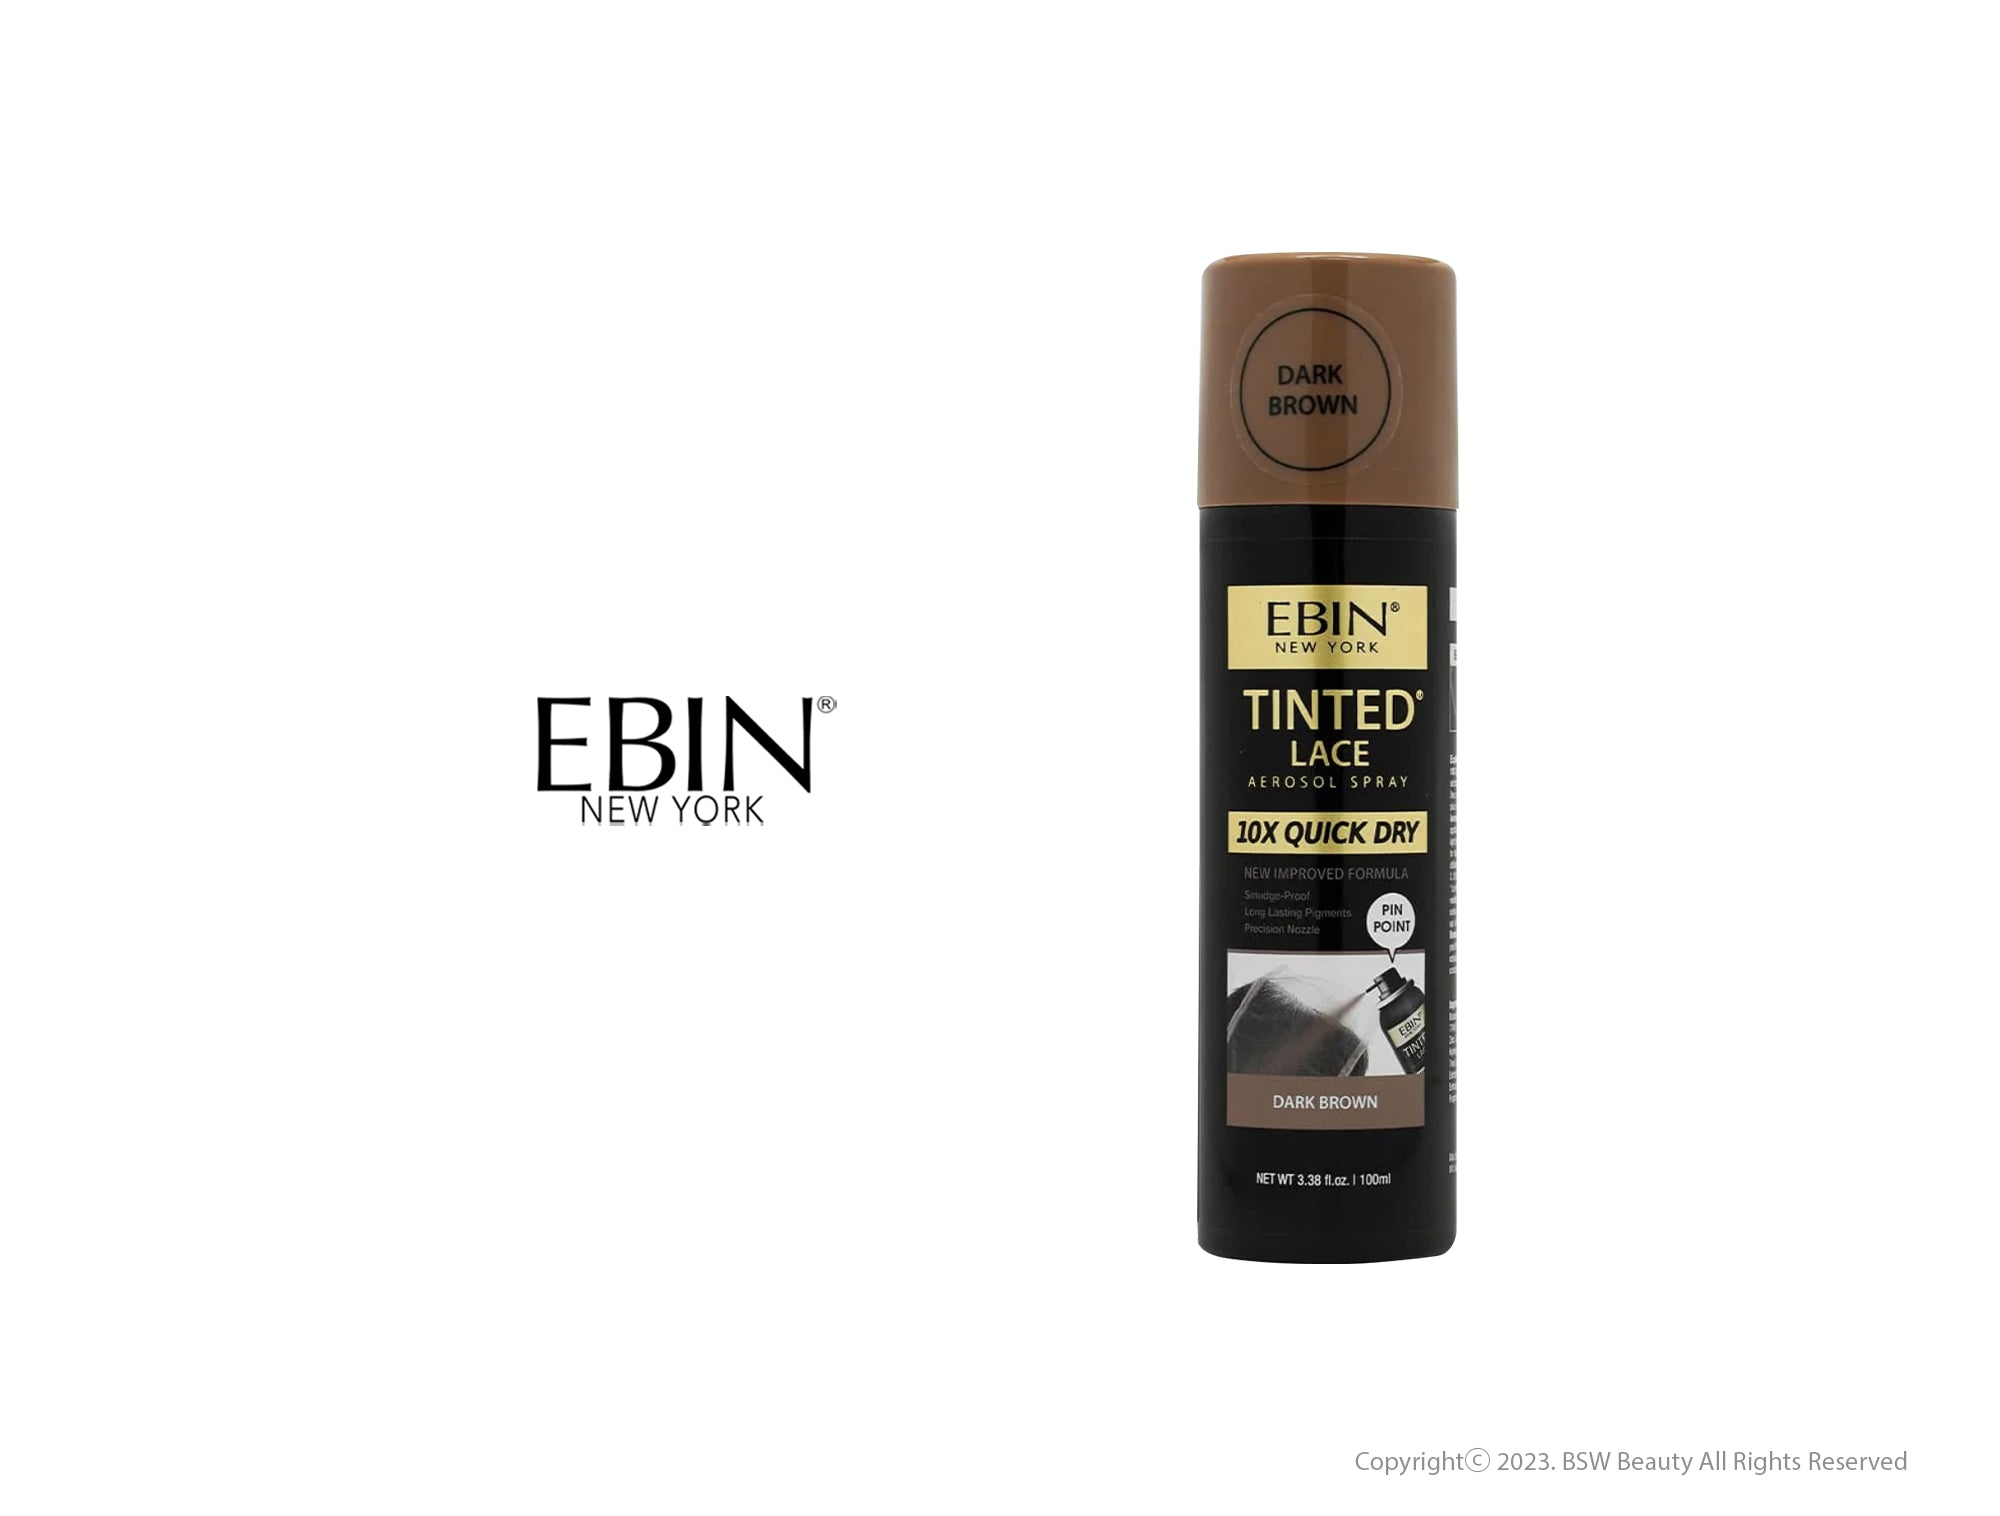  EBIN NEW YORK Tinted Lace Foaming Mousse - Dark Brown, 3.38oz/  100ml : Beauty & Personal Care